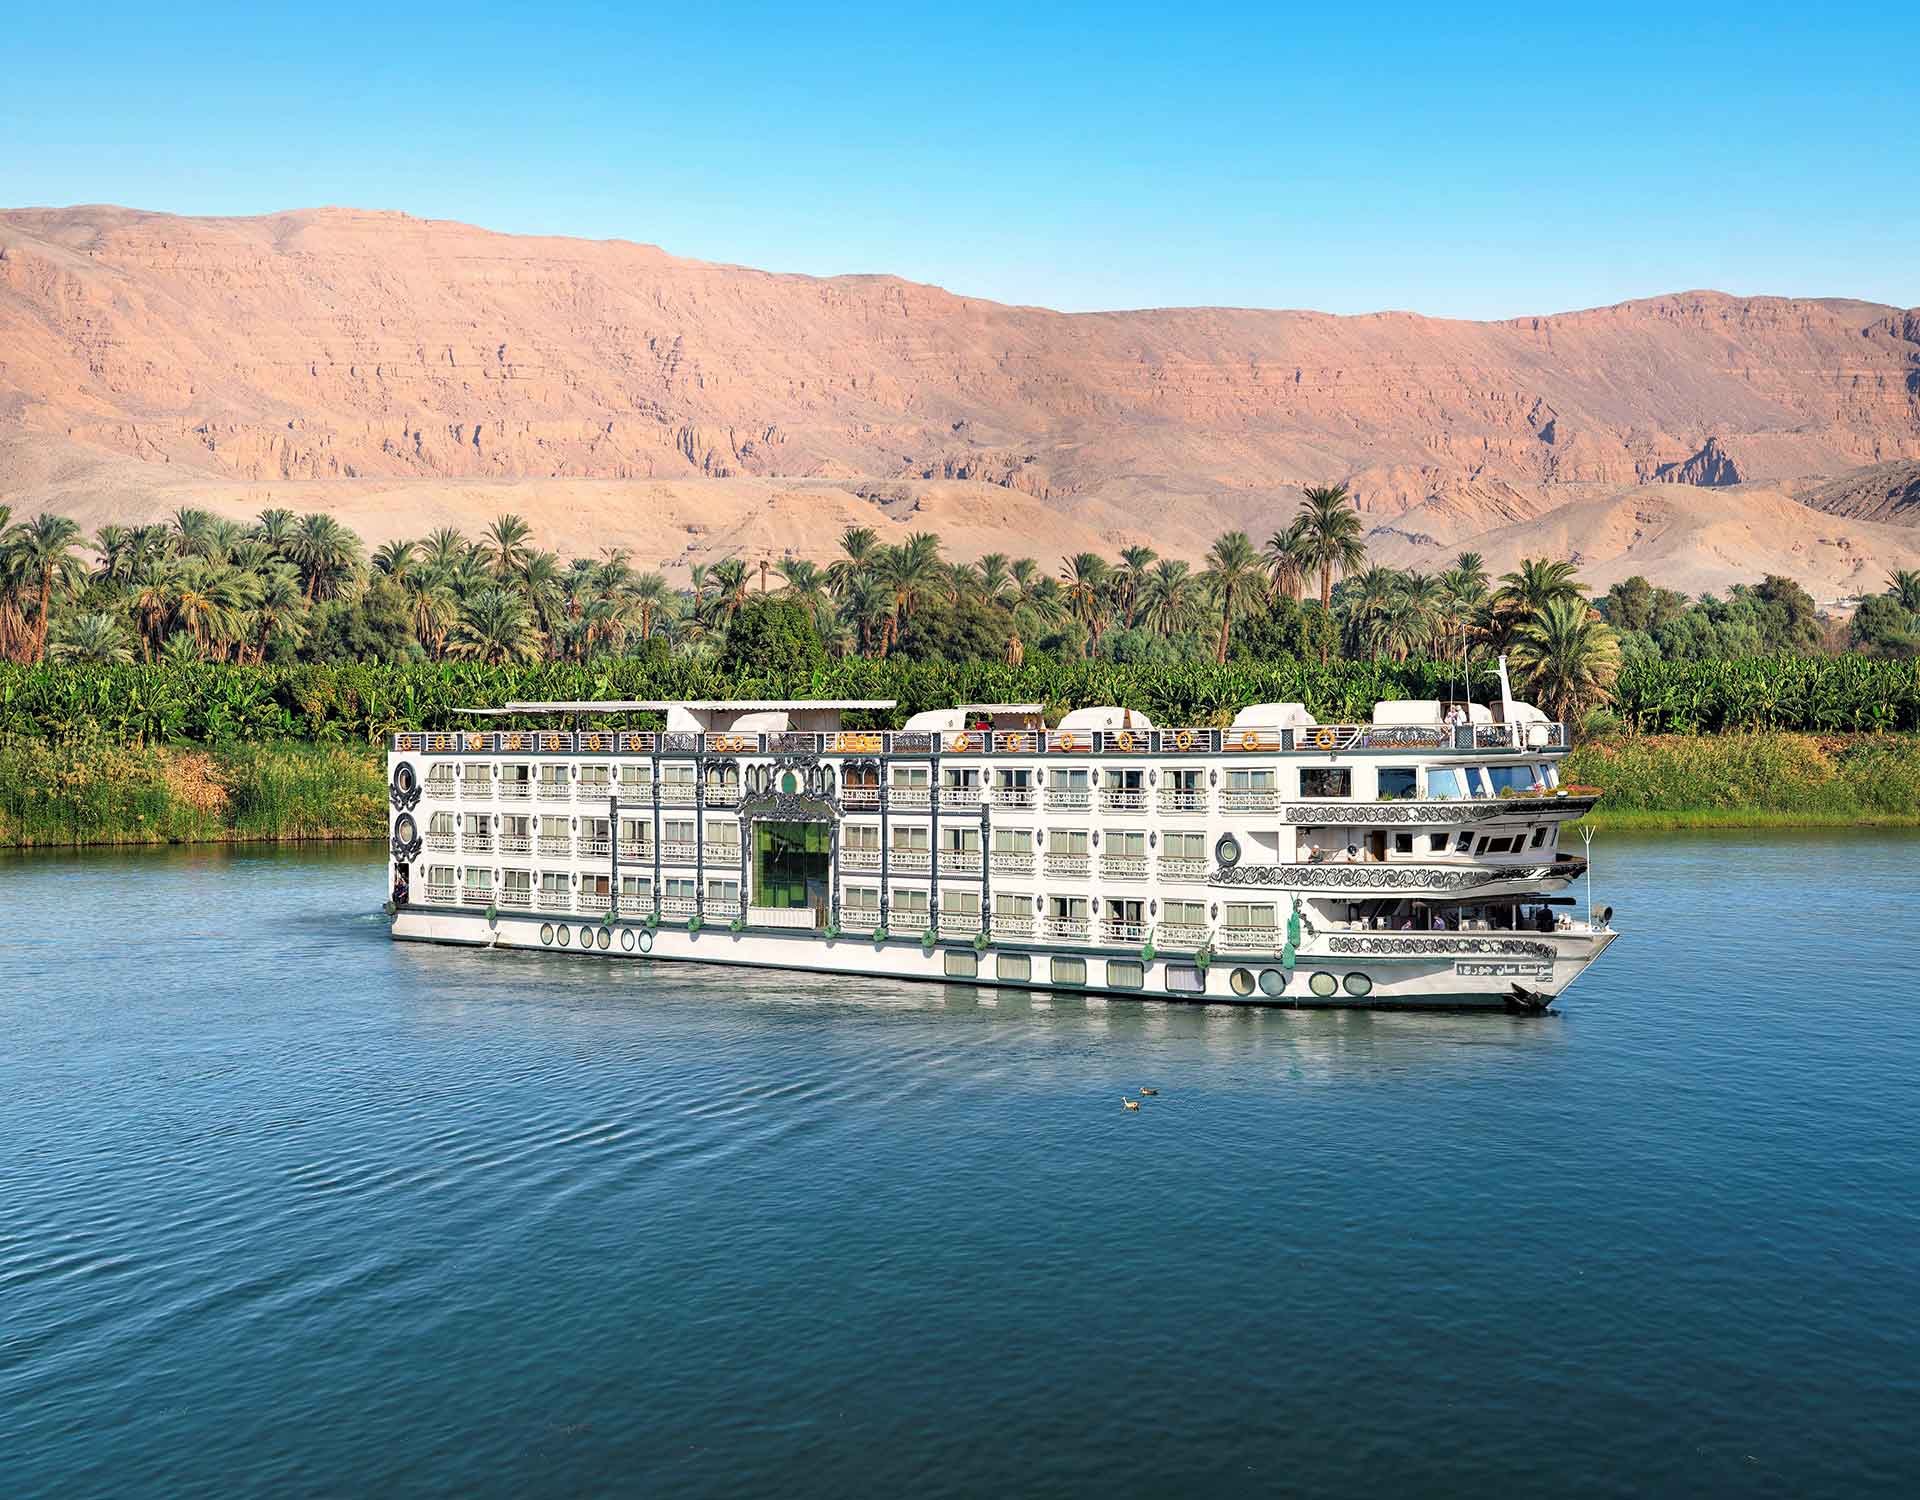 nile cruise egypt luxor and aswan best one.